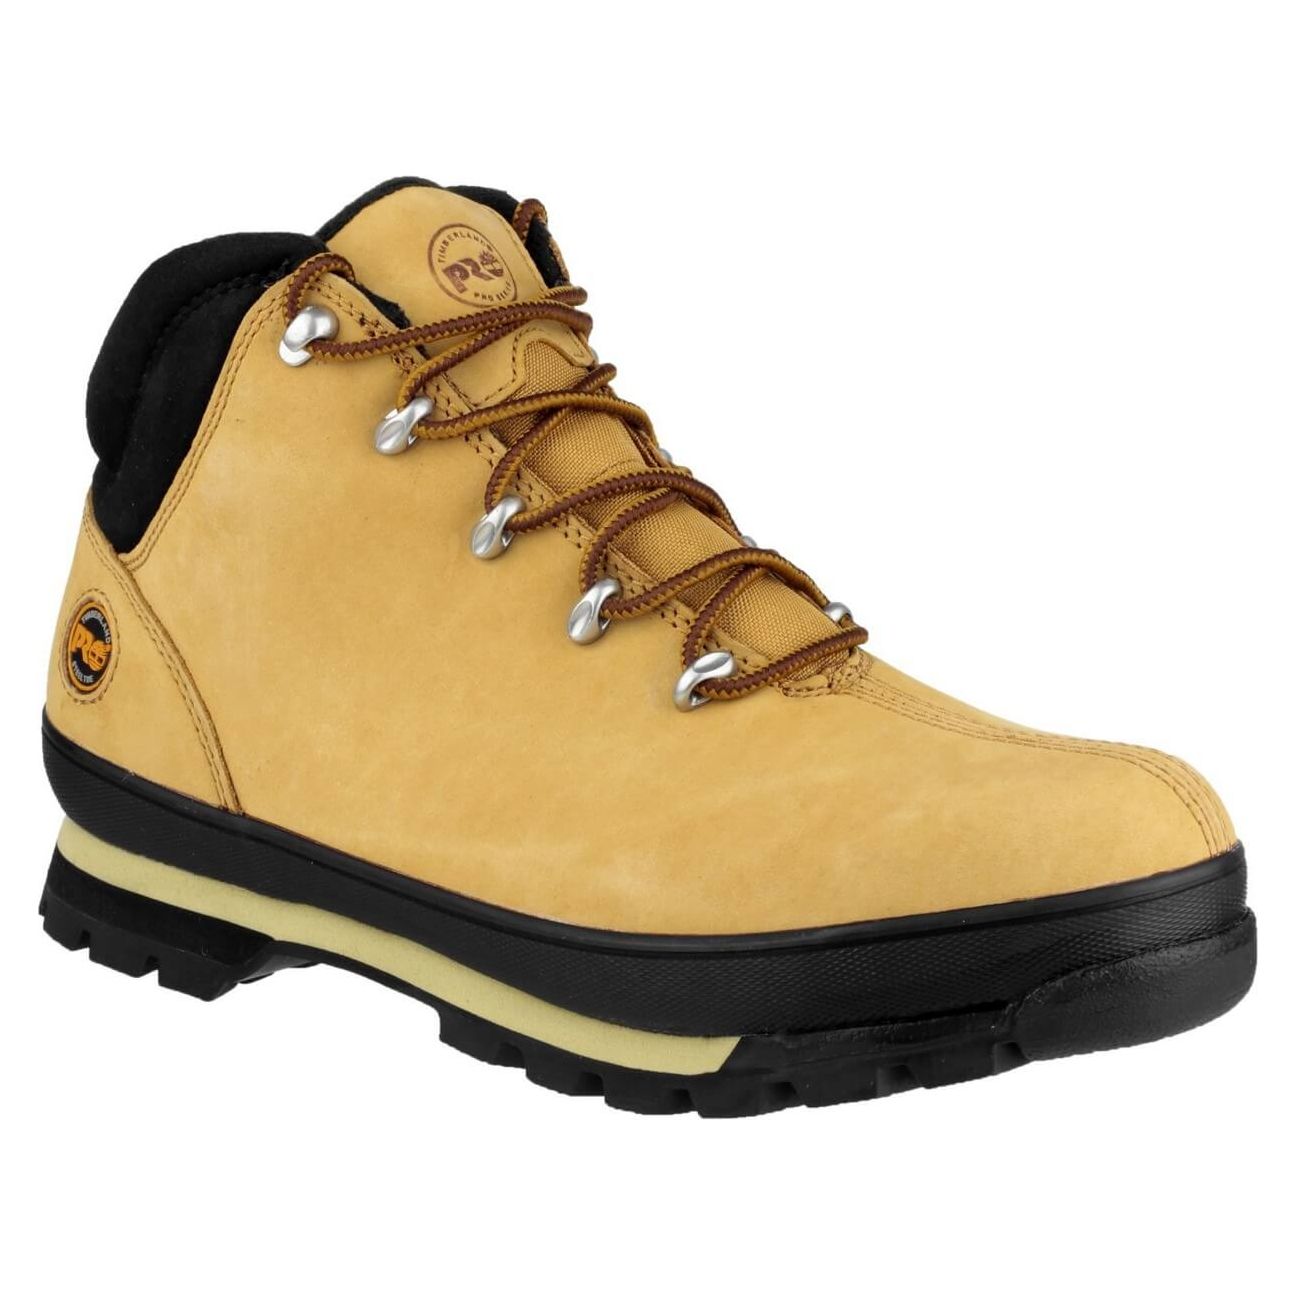 Timberland Sawhorse Safety Boots - Mens - Sale